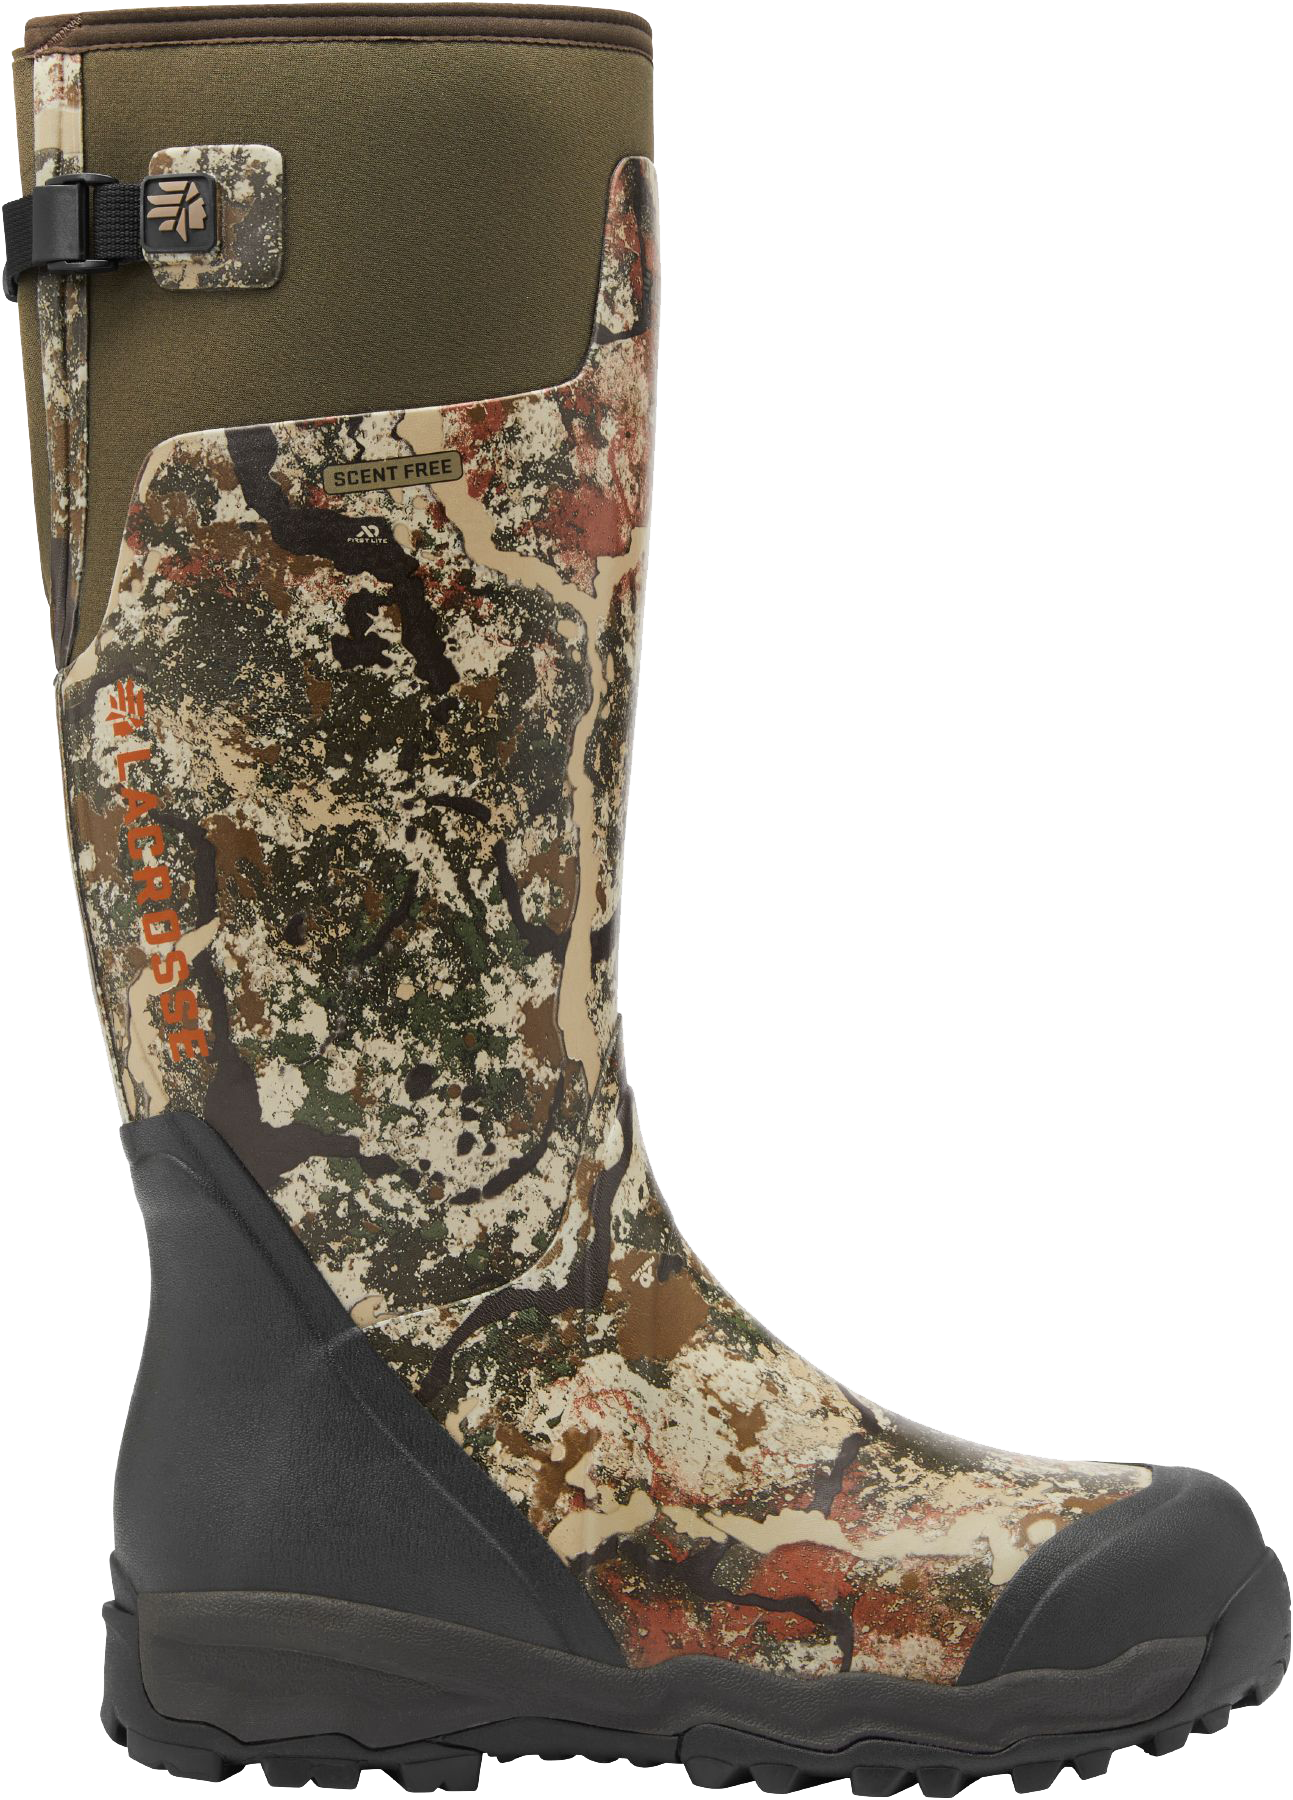 LaCrosse AlphaBurly Pro Hunting Boots for Men - First Lite Specter - 5M